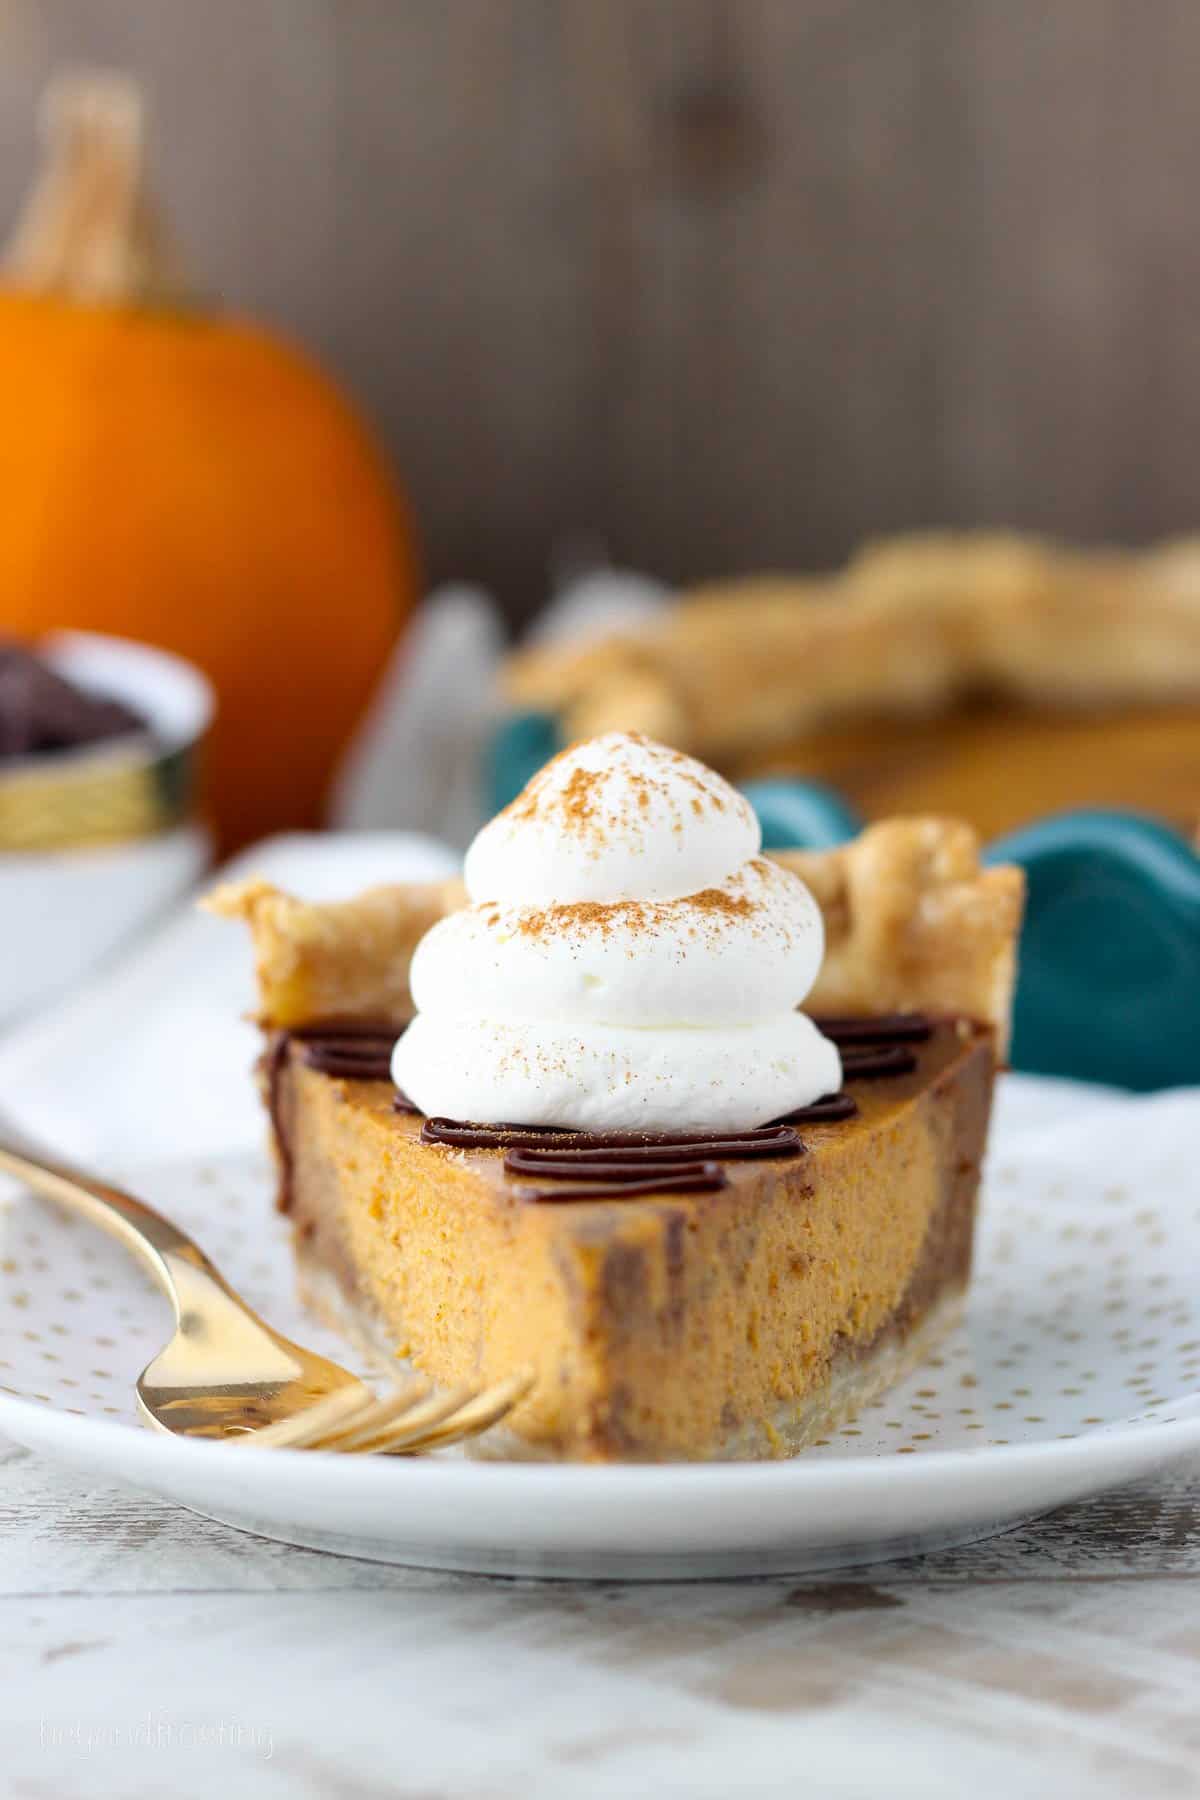 front view of a slice of chocolate pumpkin pie topped with whipped cream and chocolate ganache